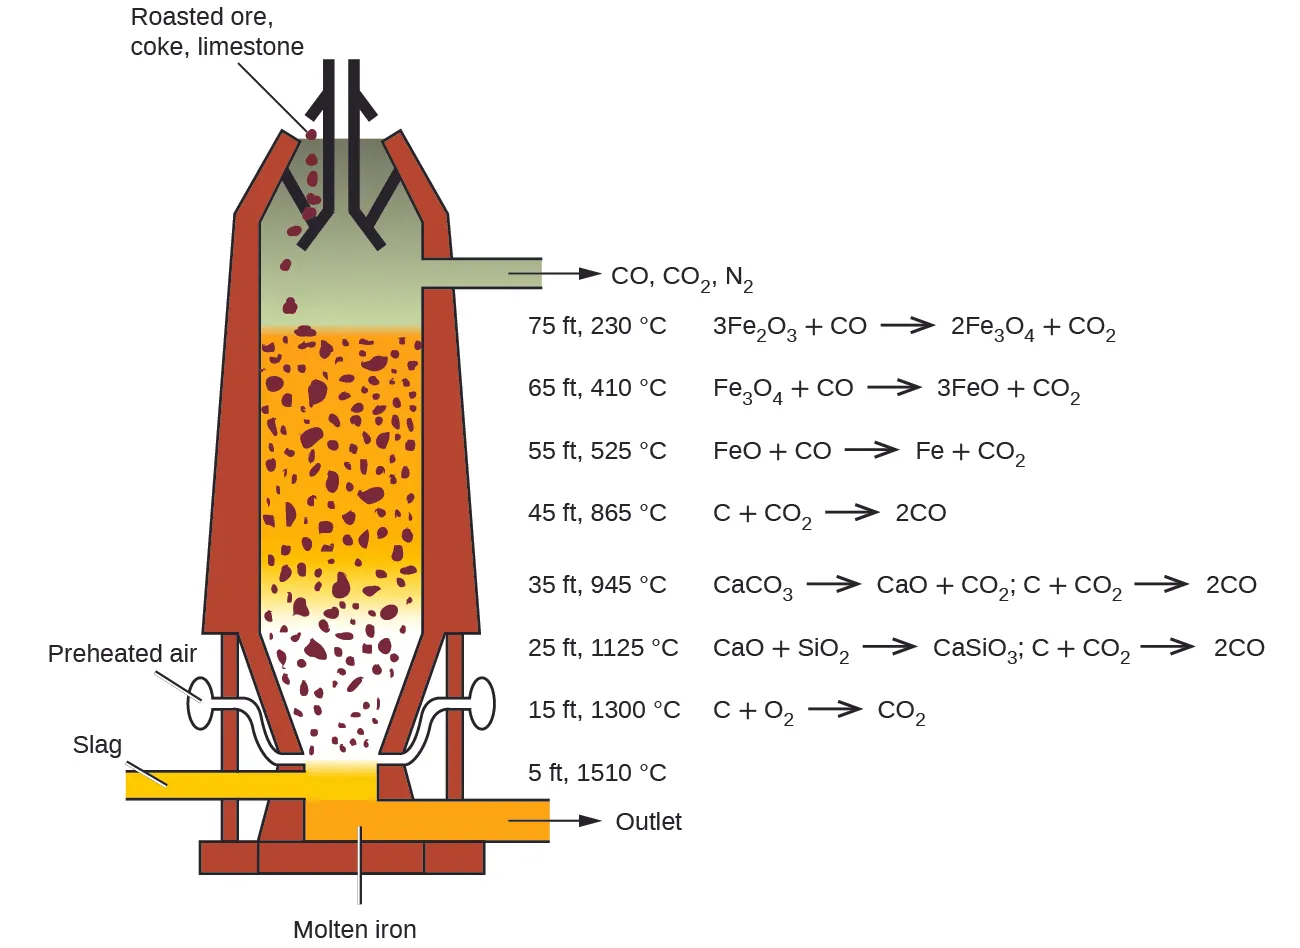 A diagram of a blast furnace is shown. The furnace has a cylindrical shape that is oriented vertically. A pipe at the lower left side of the figure is shaded yellow and is labeled “Slag.” It connects to an interior chamber. Situated at a level just below this piping on the right side of the figure is another pipe that is shaded orange. It opens at the lower right side of the figure. The orange-shaded substance at the bottom of the chamber that matches the contents of the pipe to its right is labeled “Molten iron.” The pipe has an arrow exiting to the right pointing to the label “Outlet.” Just above the slag and molten iron regions is narrower tubing on both the left and right sides of the chamber which lead slightly up and out from the central chamber to small oval shapes. These shapes are labeled, “Preheated air.” The region just above the points of entry of these two pipes or tubes into the chamber is a white region in which small rust-colored chunks of material appear suspended. This region tapers slightly to the bottom of the furnace. The region above has an orange background in which small rust-colored chunks are similarly suspended. This region fills nearly half of the interior of the furnace. Above this region is a grey shaded region. At the very top of the furnace, black line segments indicate directed openings through which small rust-colored chunks of material appear to be entering the furnace from the top. This material is labeled, “Roasted ore, coke, limestone.” Exiting the grey shaded interior region to the right is a pipe. An arrow points right exiting the pipe pointing to the label “C O, C O subscript 2, N subscript 2.” At the right side of the figure, furnace heights are labeled in order of increasing height between the outlet pipes, followed by temperatures and associated chemical reactions. Just above the pipe labeled, “Outlet,” no chemical equation appears right of, “5 f t, 1510 degrees C.” To the right of, “15 f t, 1300 degrees C,” is the equation, “C plus O subscript 2 right pointing arrow C O subscript 2.” To the right of, “25 f t, 1125 degrees C,” are the two equations, “C a O plus S i O subscript 2 right pointing arrow C a S i O subscript 3” and “C plus C O subscript 2 right pointing arrow 2 C O.” To the right of, “35 f t, 945 degrees C,” are the two equations, “C a C O subscript 3 right pointing arrow C a O plus C O subscript 2,” and, “C plus C O subscript 2 right pointing arrow 2 C O.” To the right of, “45 f t, 865 degrees C,” is the equation, “C plus C O subscript 2 right pointing arrow 2 C O.” To the right of, “55 f t, 525 degrees C,” is the equation “F e O plus C O right pointing arrow F e plus C O subscript 2.” To the right of, “65 f t, 410 degrees C,” is the equation, “F e subscript 3 O subscript 4 plus C O right pointing arrow 3 F e O plus C O subscript 2.” To the right of “75 f t, 230 degrees C,” is the equation, “3 F e subscript 2 O subscript 3 plus C O right pointing arrow 2 F e subscript 3 O subscript 4 plus C O subscript 2.”